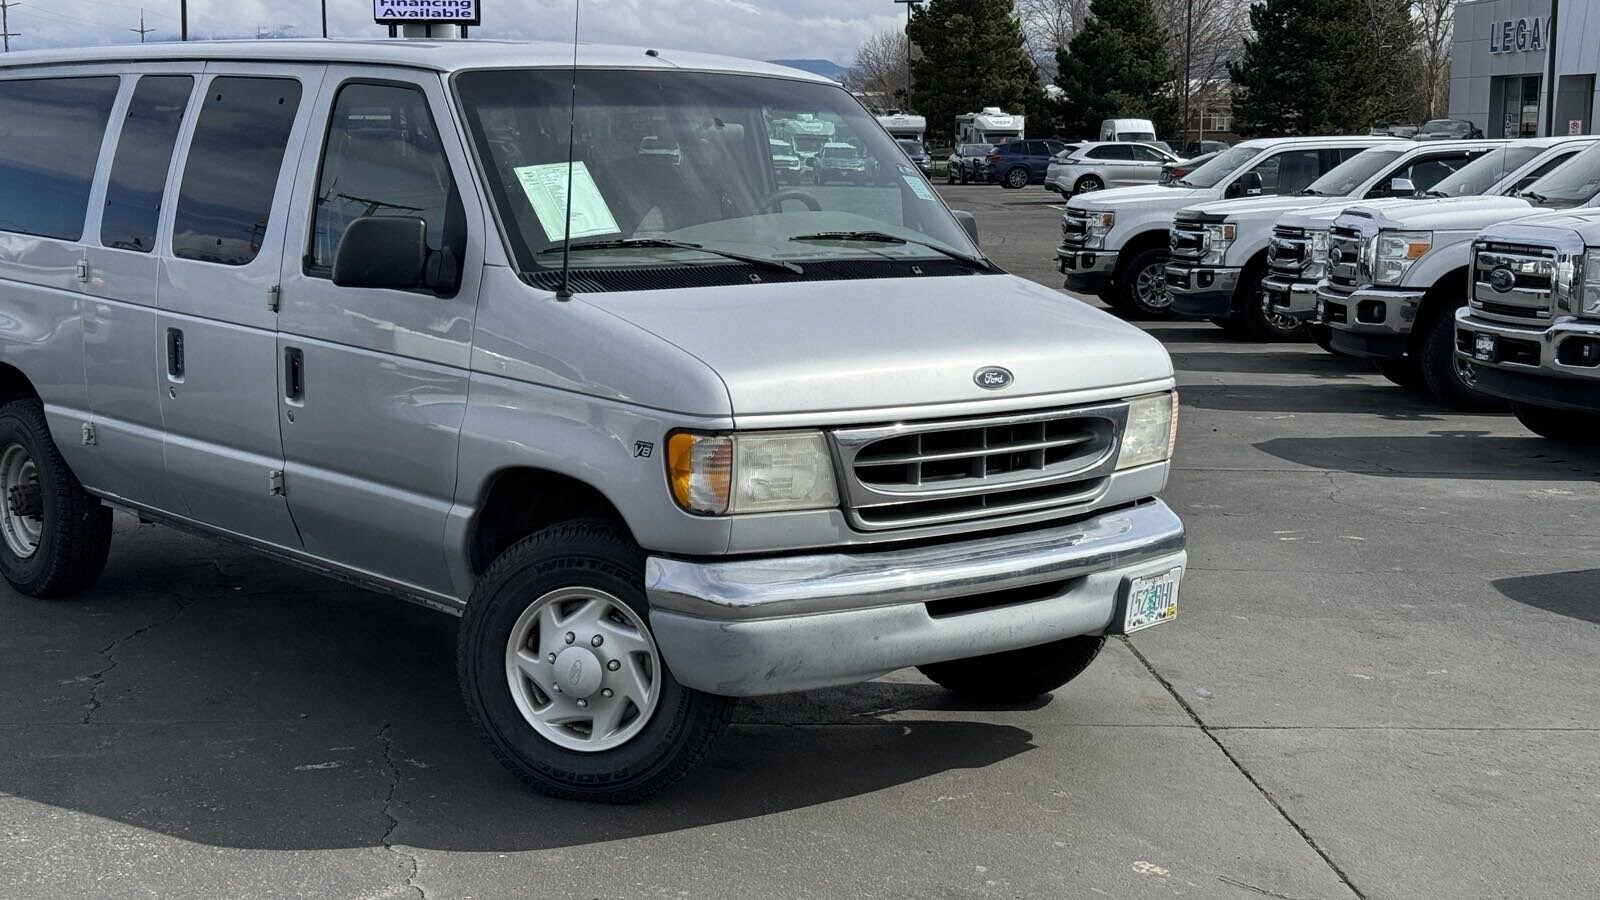 Used 2001 Ford Econoline Wagon XLT with VIN 1FBSS31L41HB16113 for sale in La Grande, OR